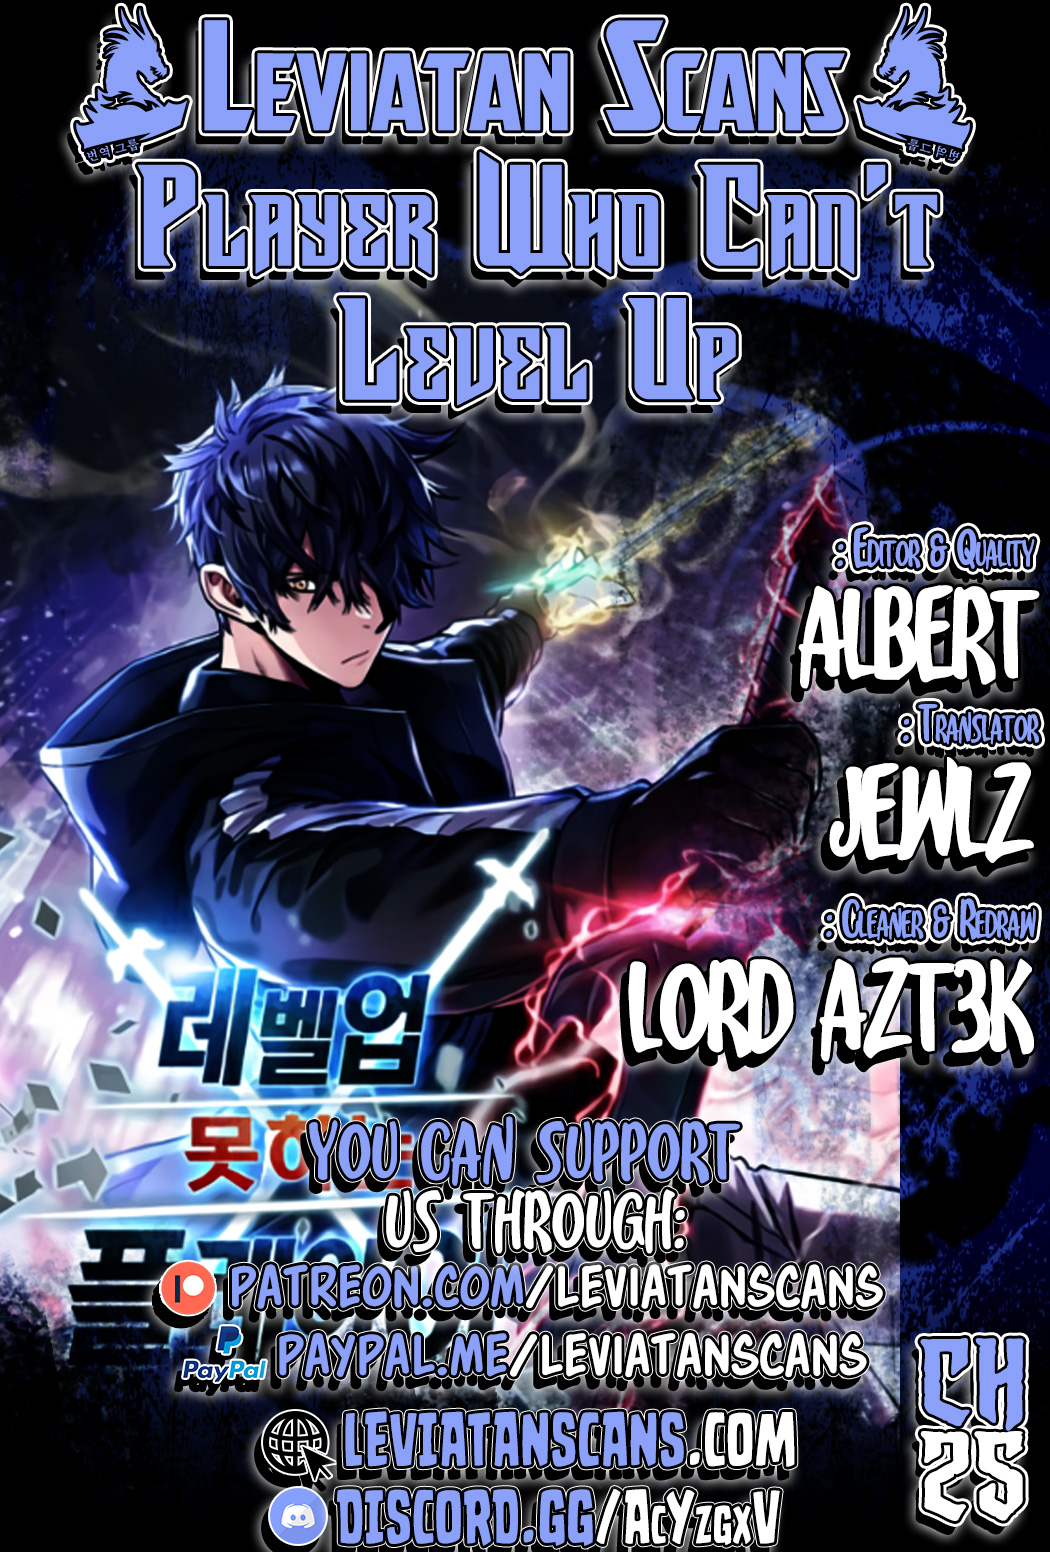 The Player That Can't Level Up - Chapter 2553 - Image 1